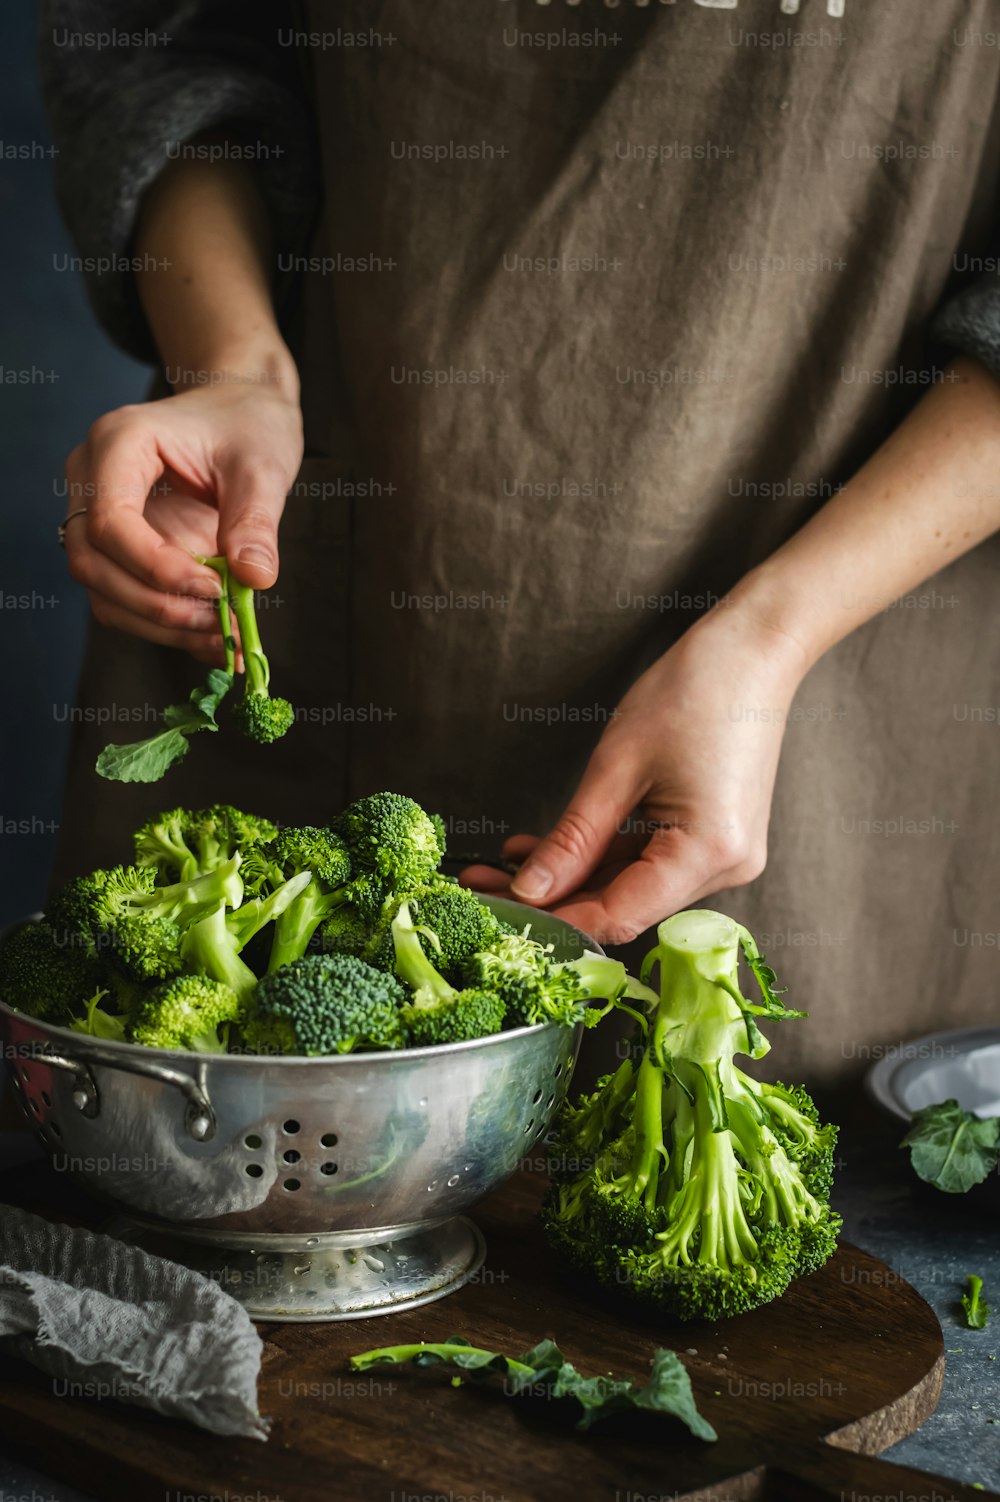 a person in an apron is cutting broccoli in a bowl